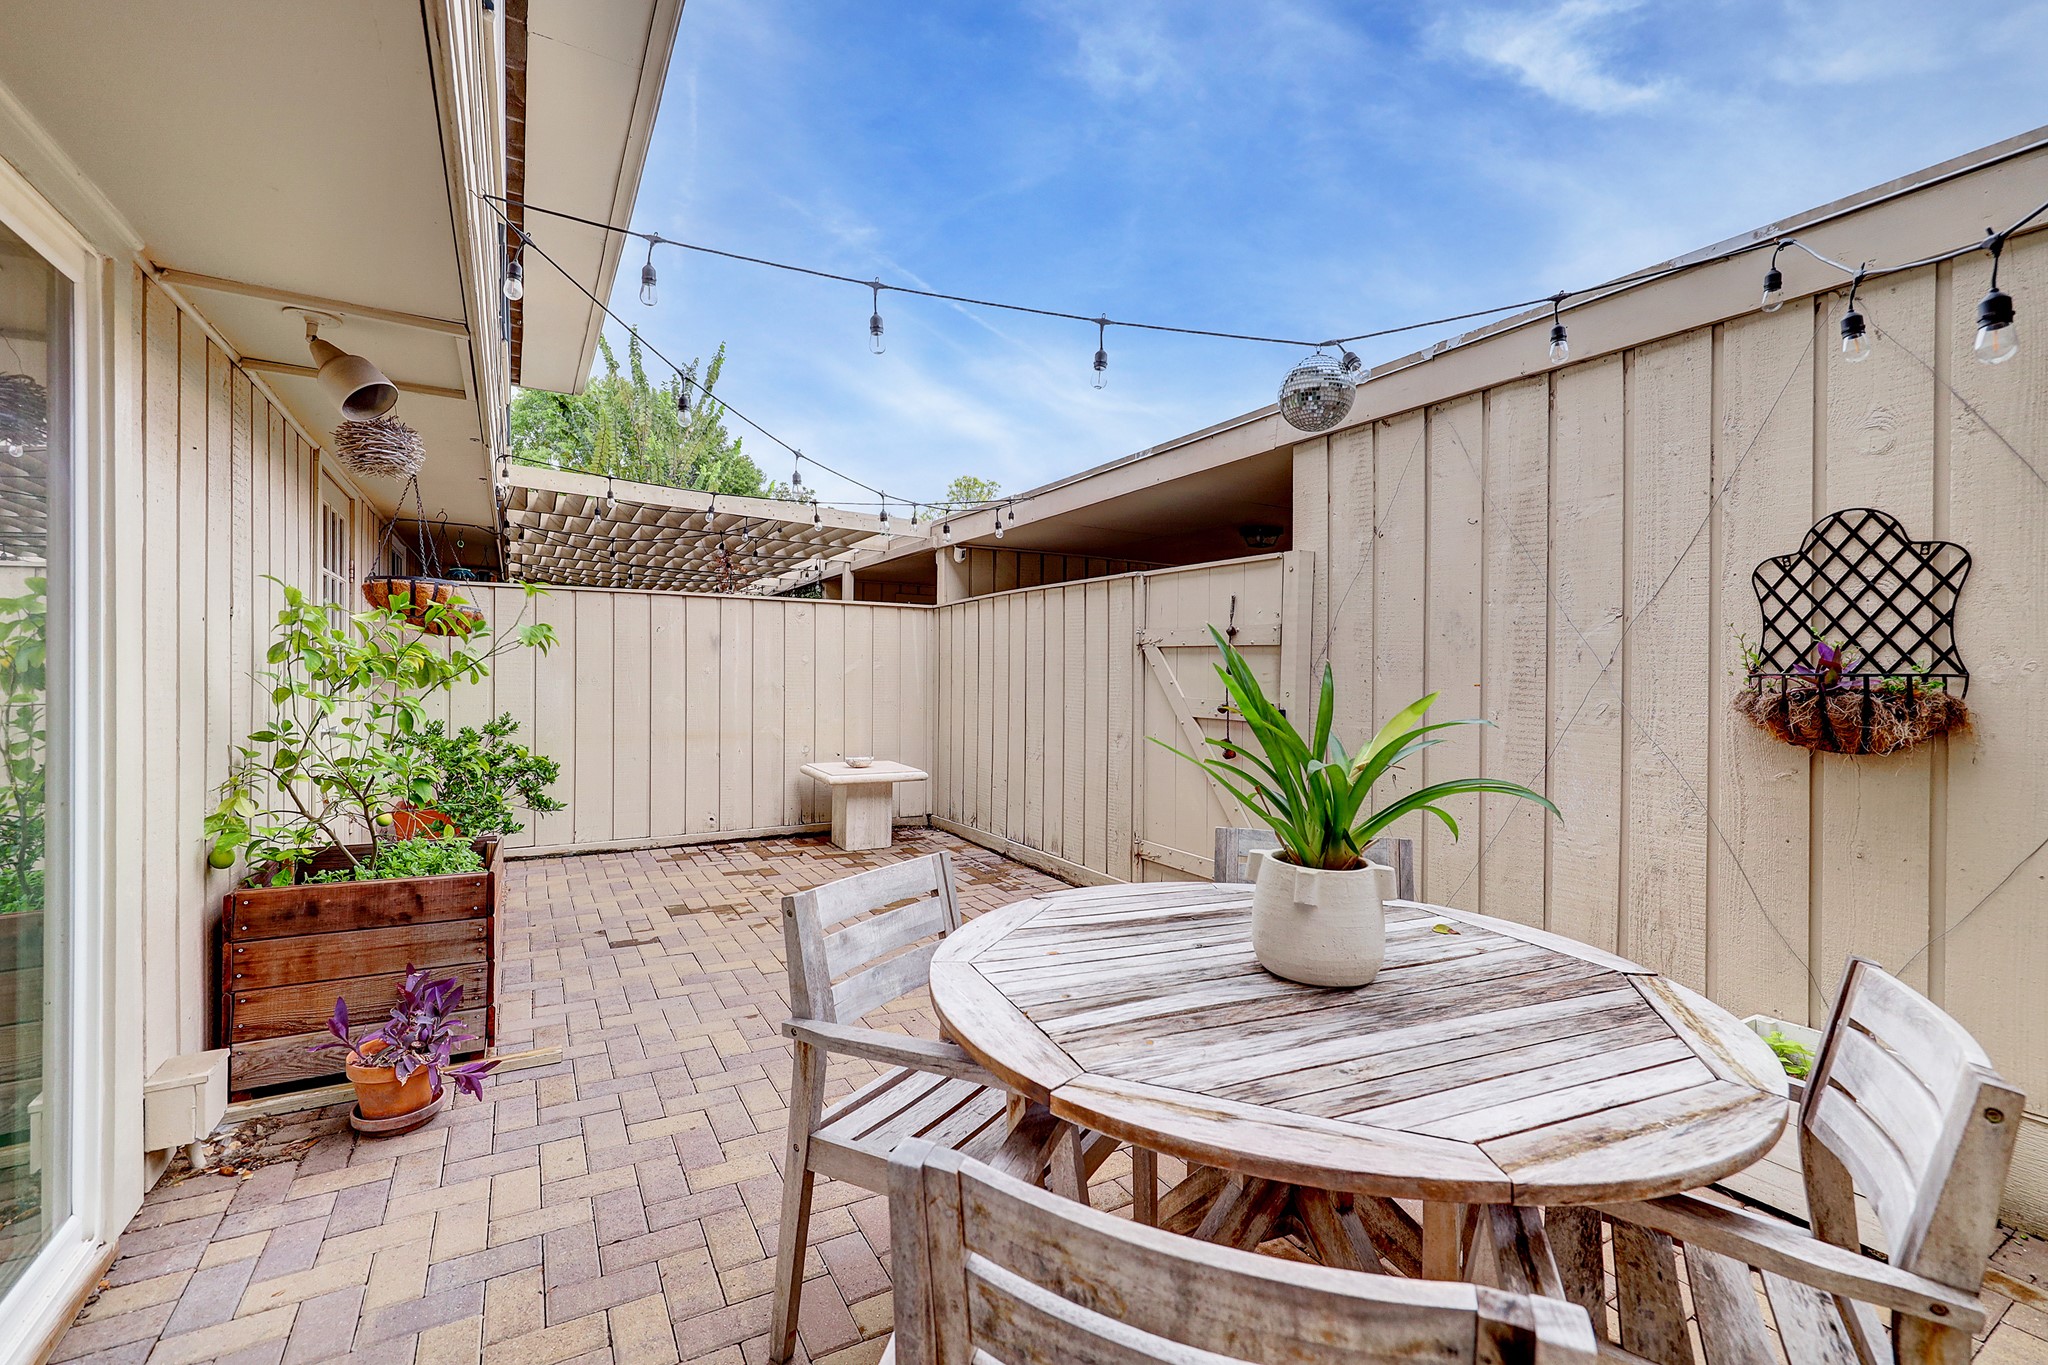 The large patio is perfect for entertaining or just relaxing. The patio leads to the garage and carport.